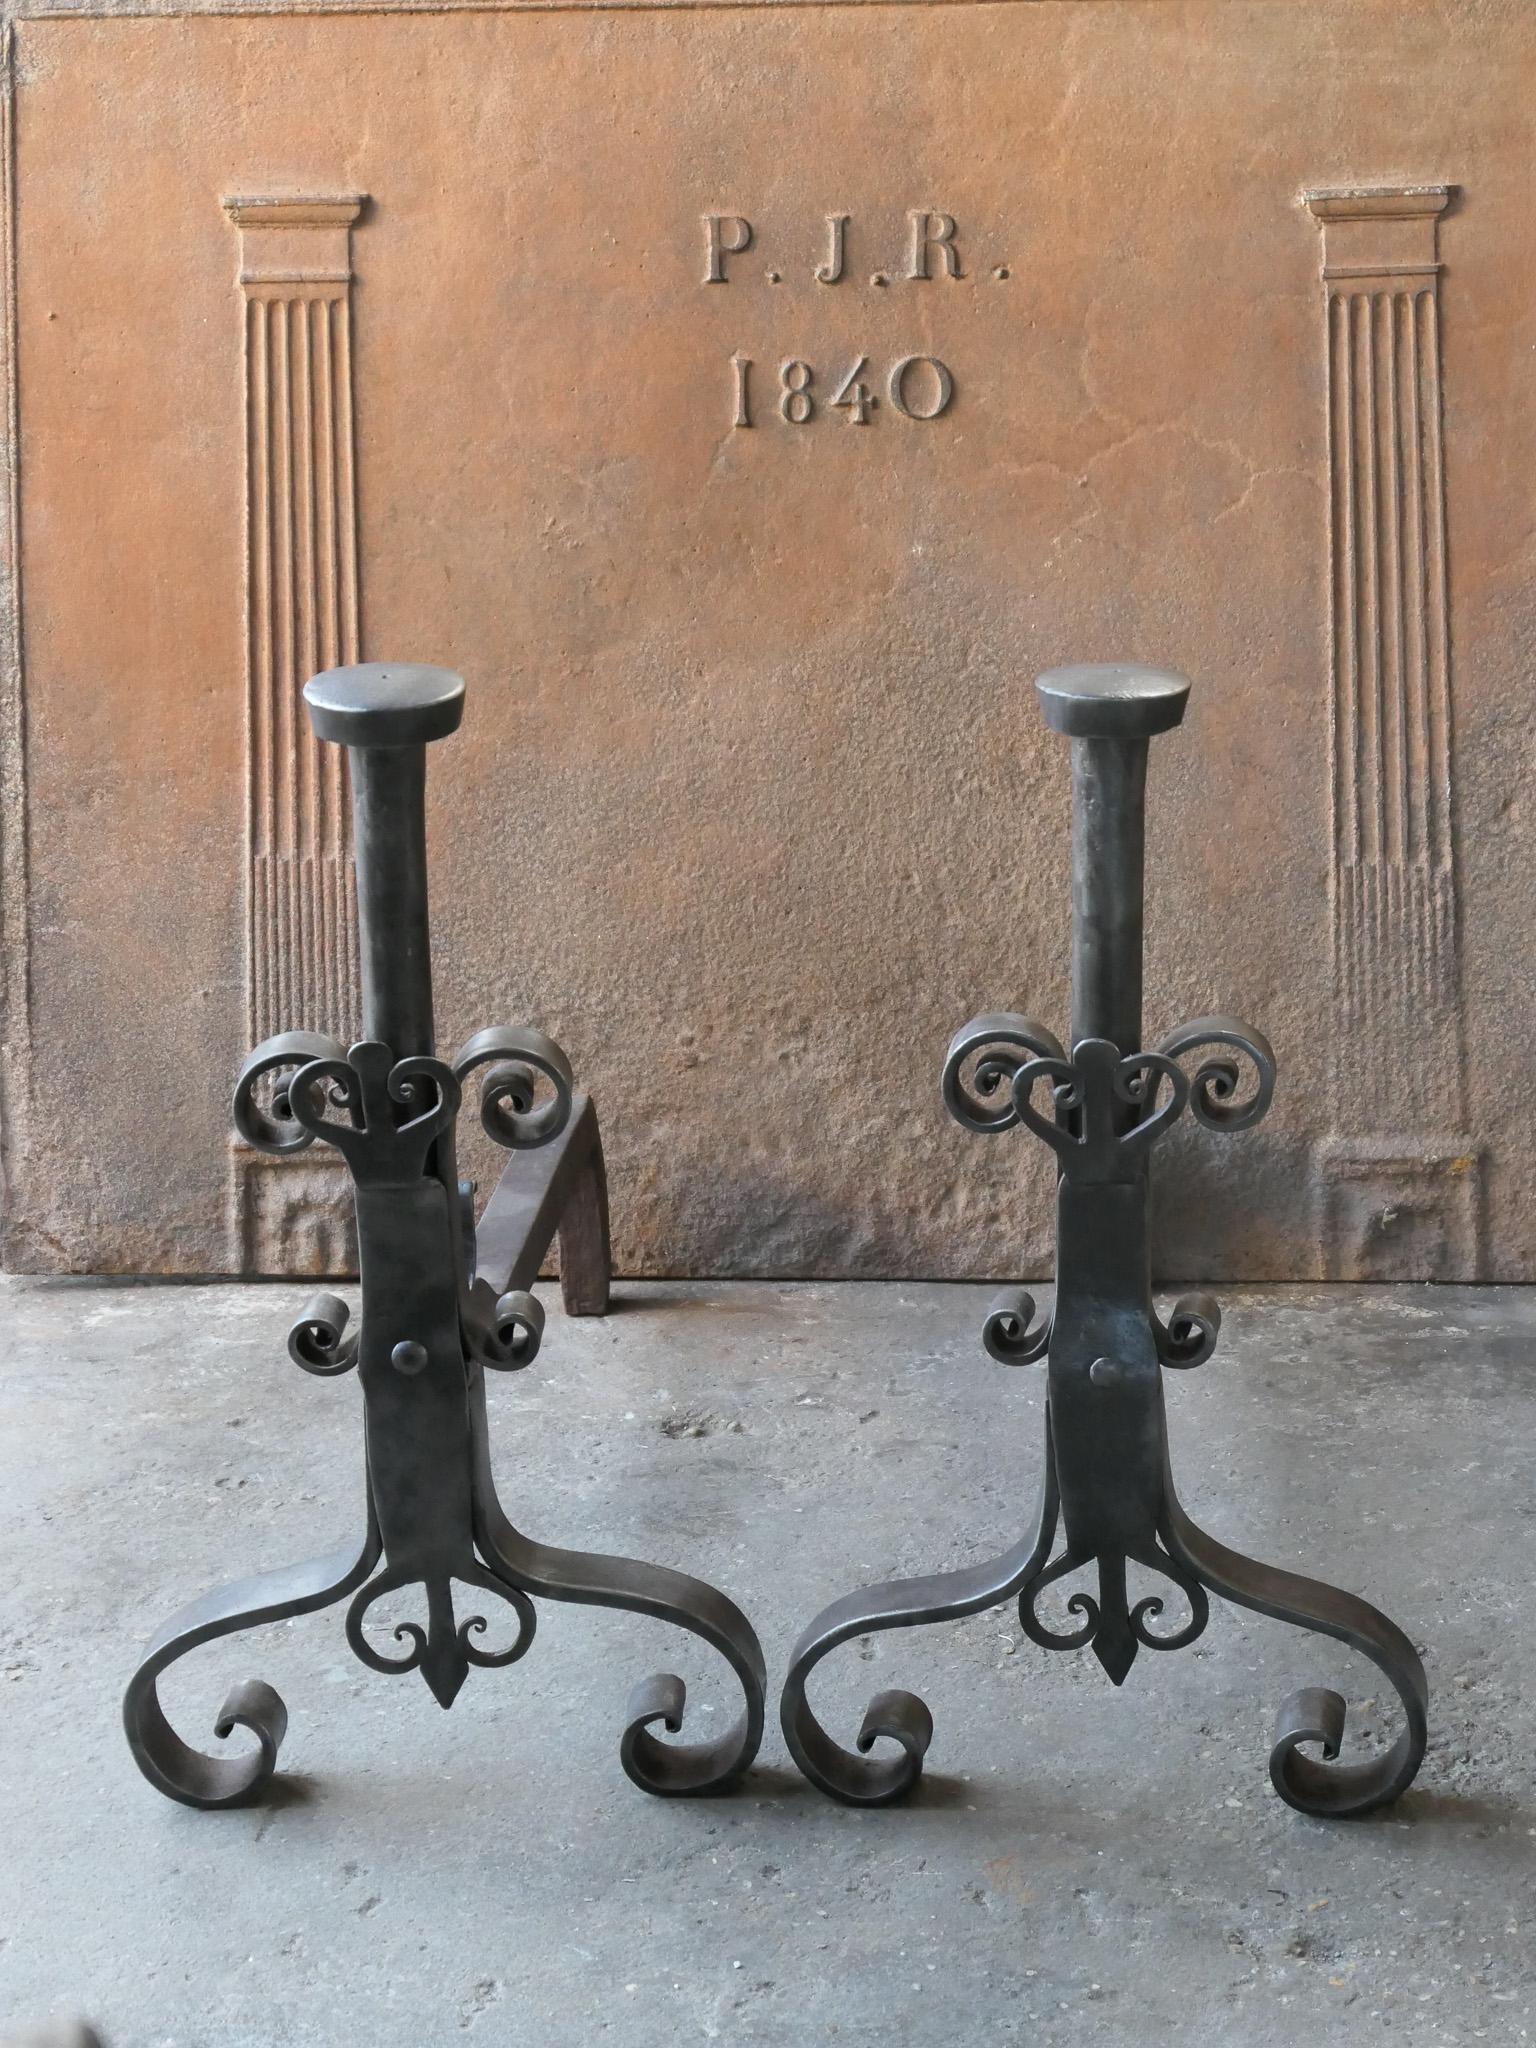 18th century French andirons - fire dogs made of wrought iron. These French andirons are called 'landiers' in France. This dates from the times the andirons were the main cooking equipment in the house. They had spit hooks to grill meat or poultry